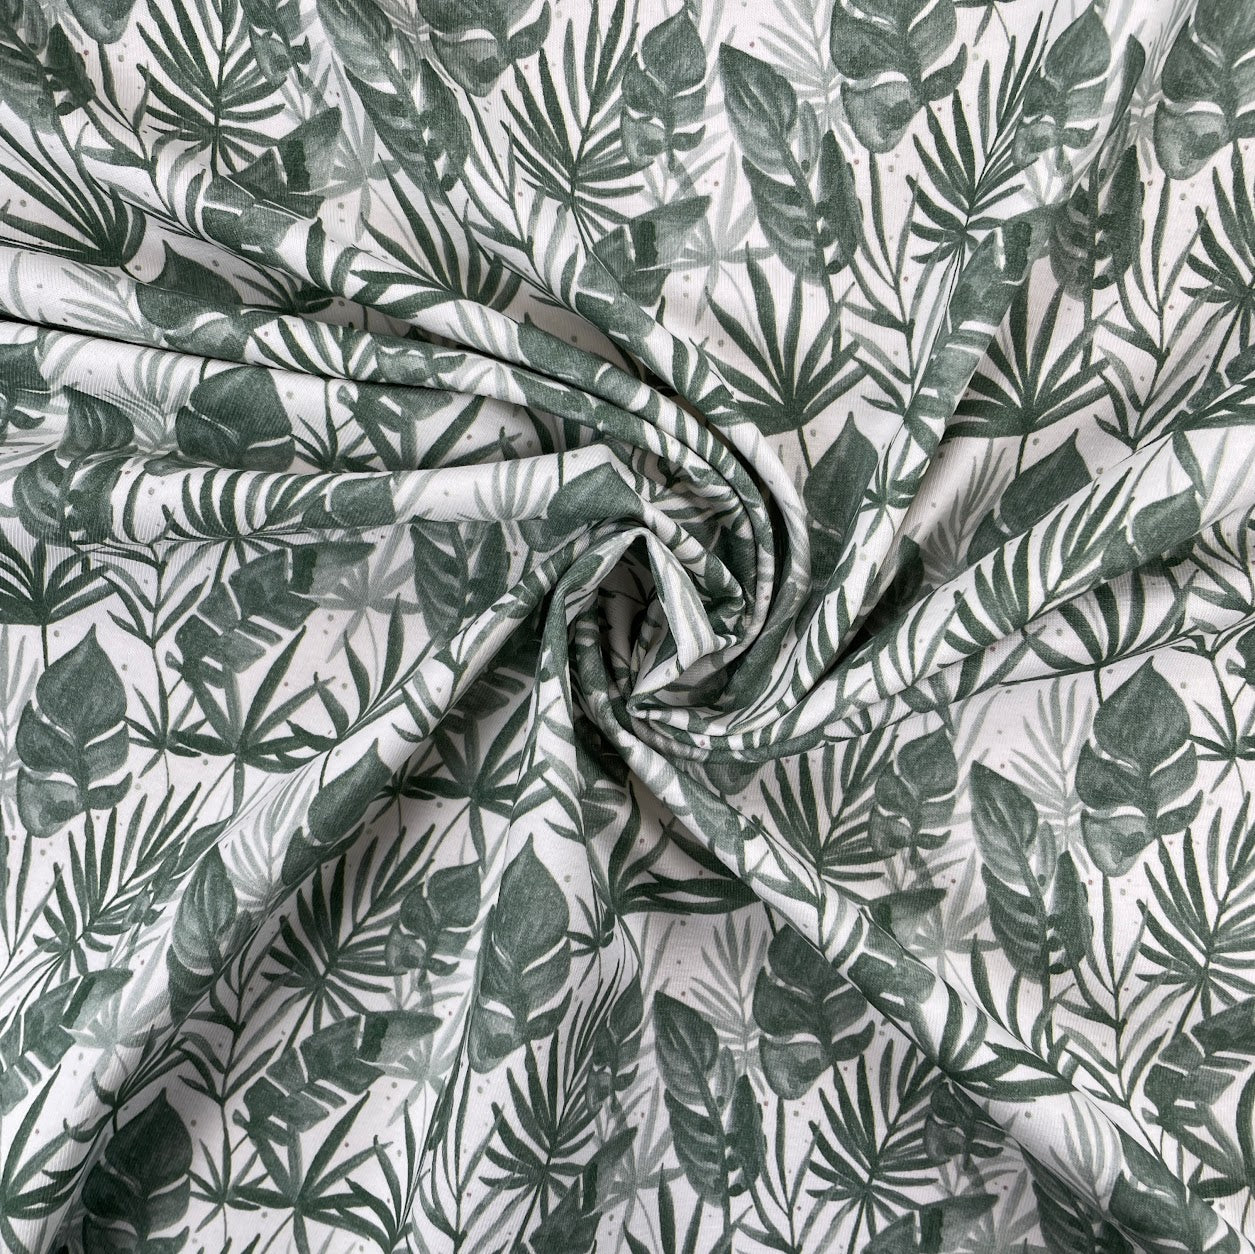 Tropical Leaves - Digitally Printed Cotton Jersey Knit